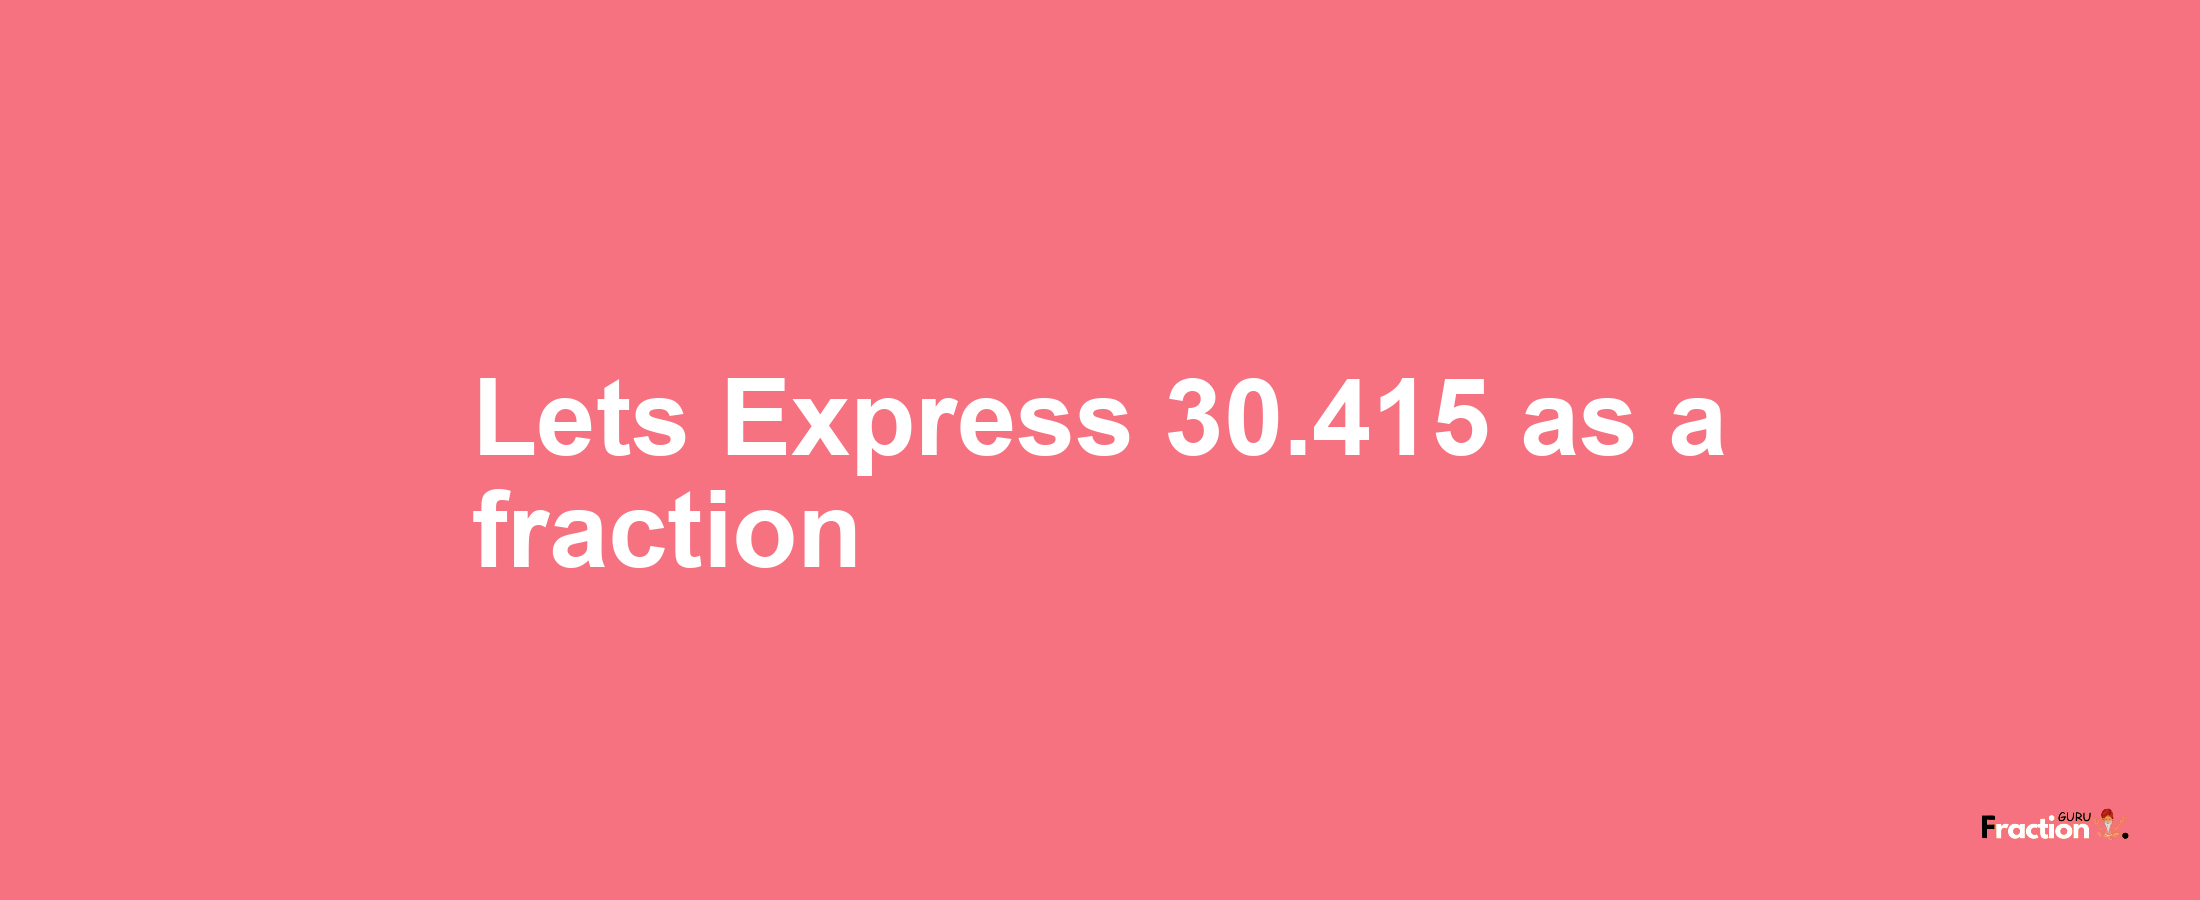 Lets Express 30.415 as afraction